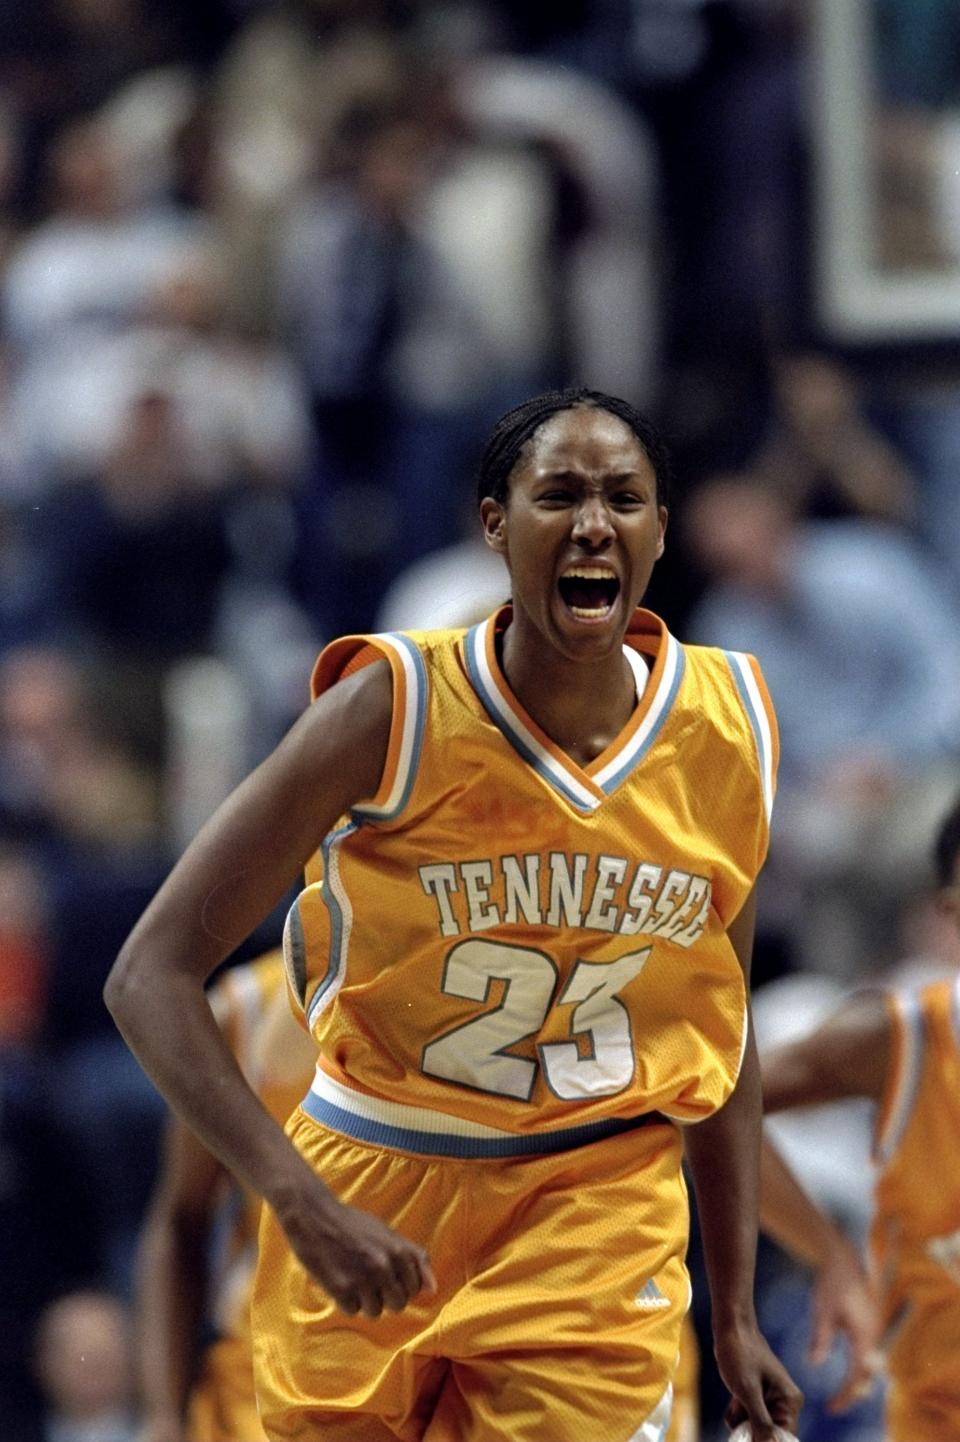 Chamique Holdsclaw repping an iconic '90s jersey.